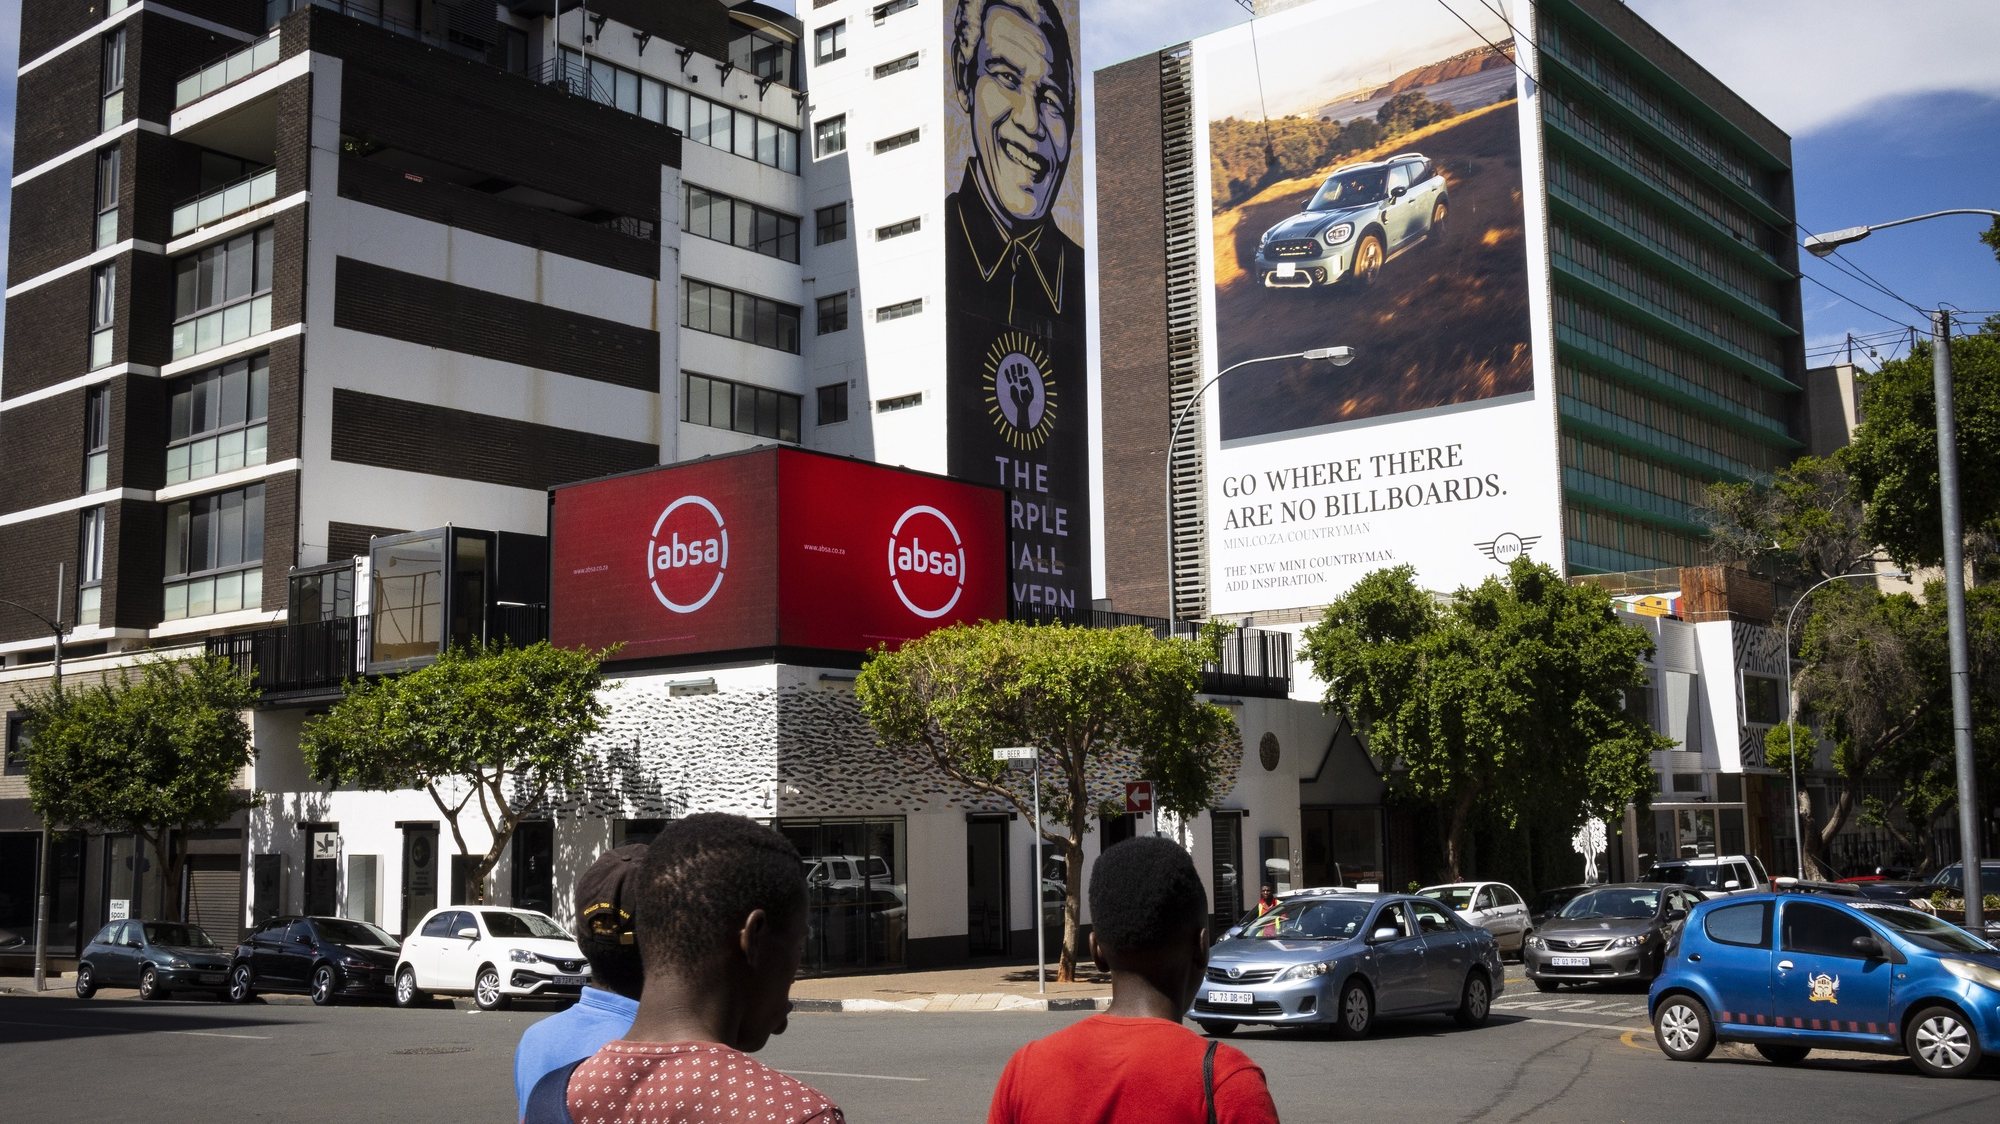 epa08873871 Pedestrians walk past bank and car dealership advertising in downtown Johannesburg, South Africa, 10 December 2020. Data from STATS SA, the national statistical service of South Africa, revealed that the economy has grown since the relaxing of Covid-19 Corona virus lockdown, with a GDP growth recording 13.5 percent in the third quarter of the year. This was recorded despite the harsh level 5 national lockdown that virtually closed the country&#039;s economy for months.  EPA/KIM LUDBROOK